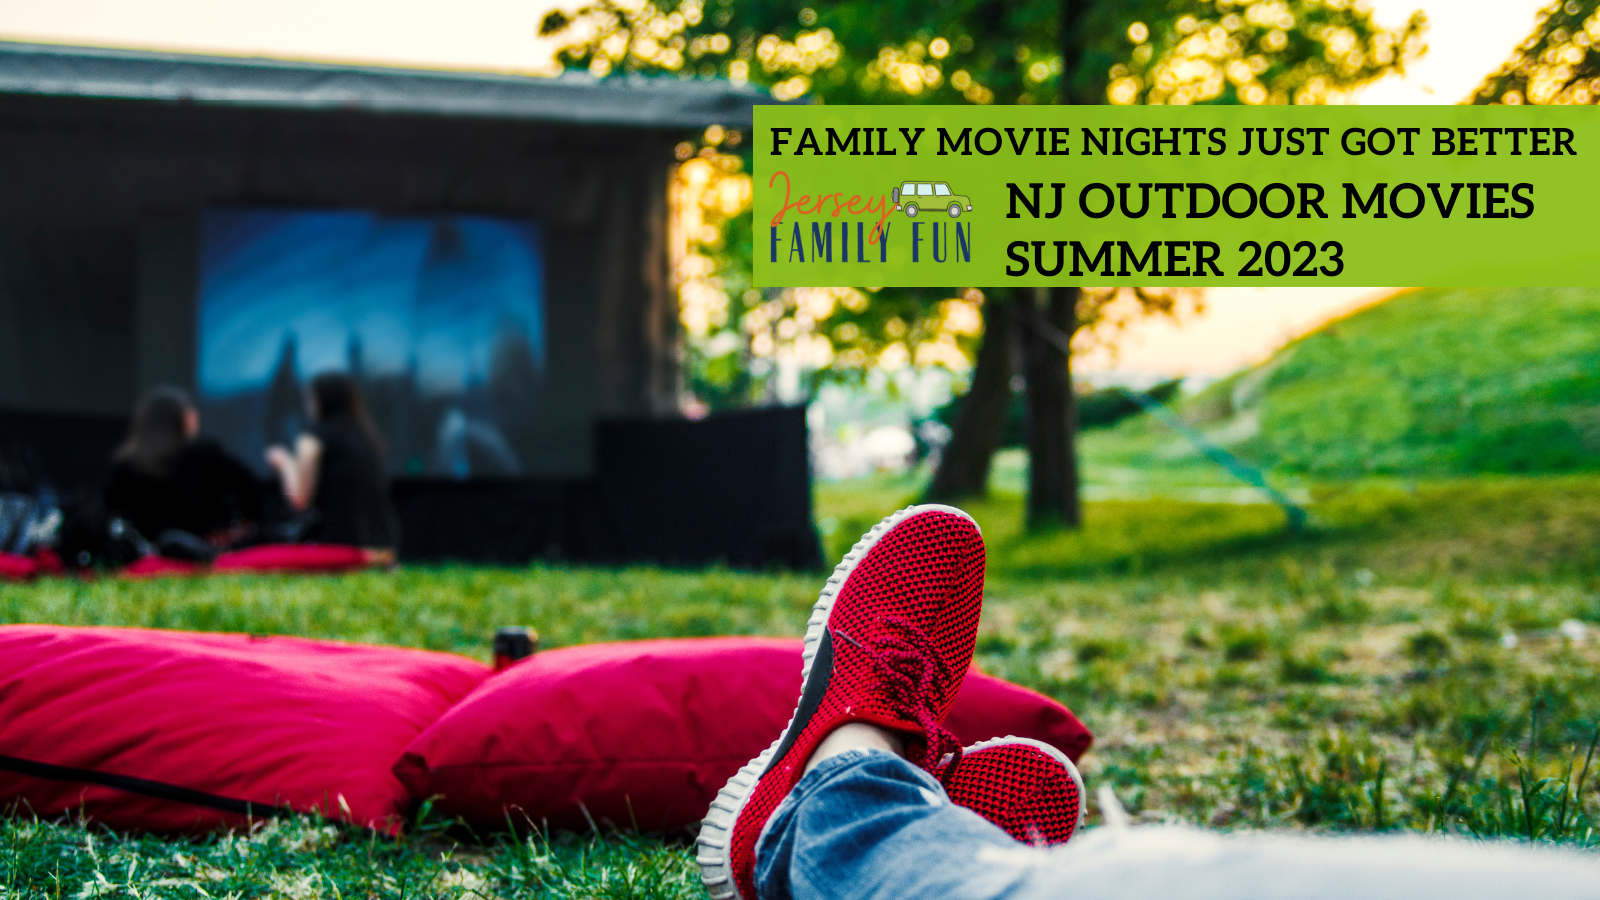 NJ Outdoor Movies for the Summer